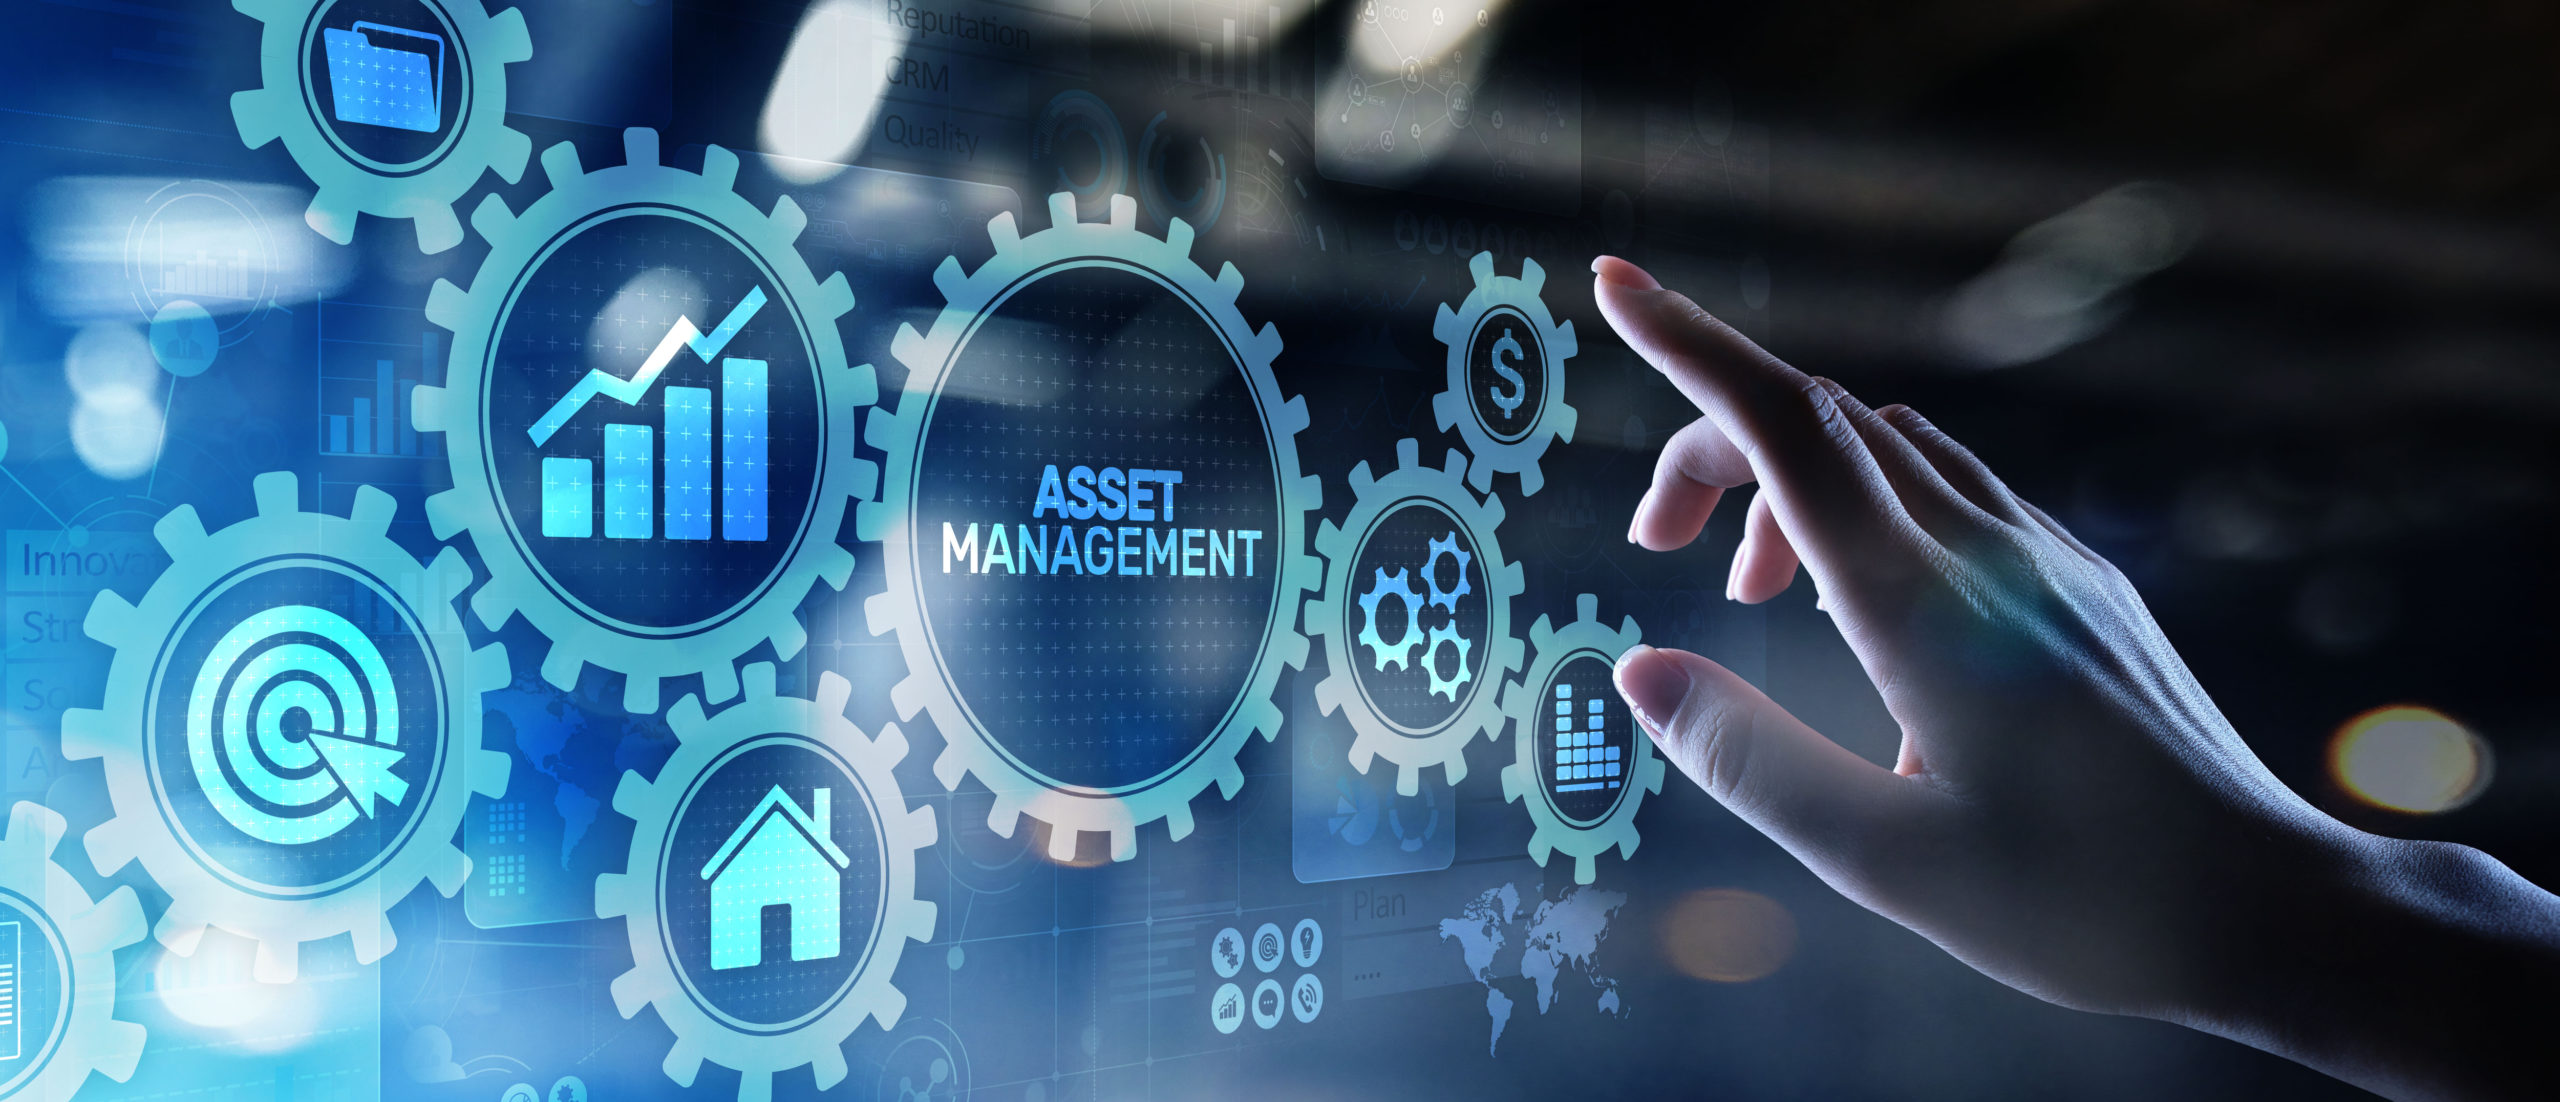 Asset Management St. Charles, MO | Financial Planners | Investment Advisors | Wealth Management